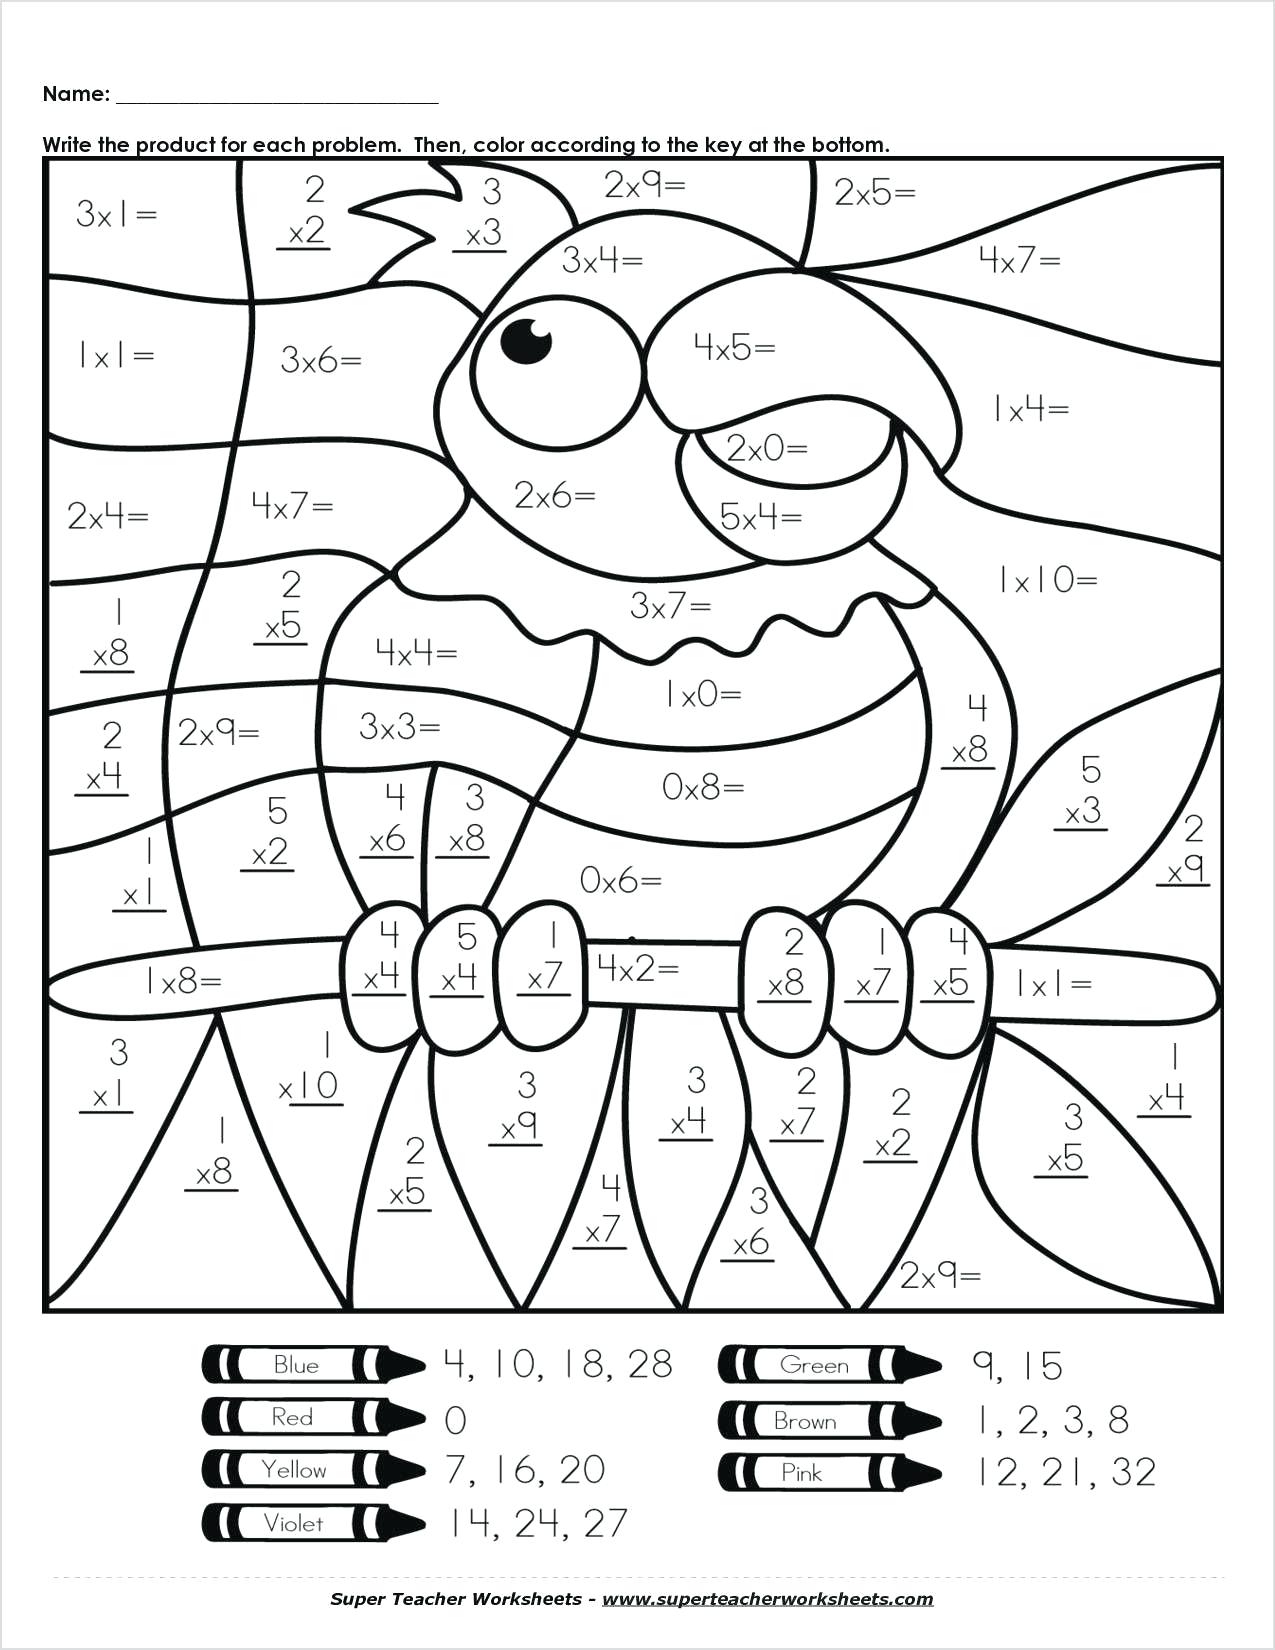 Reading Worskheets: Solving Two Step Equations Worksheet Activity ...